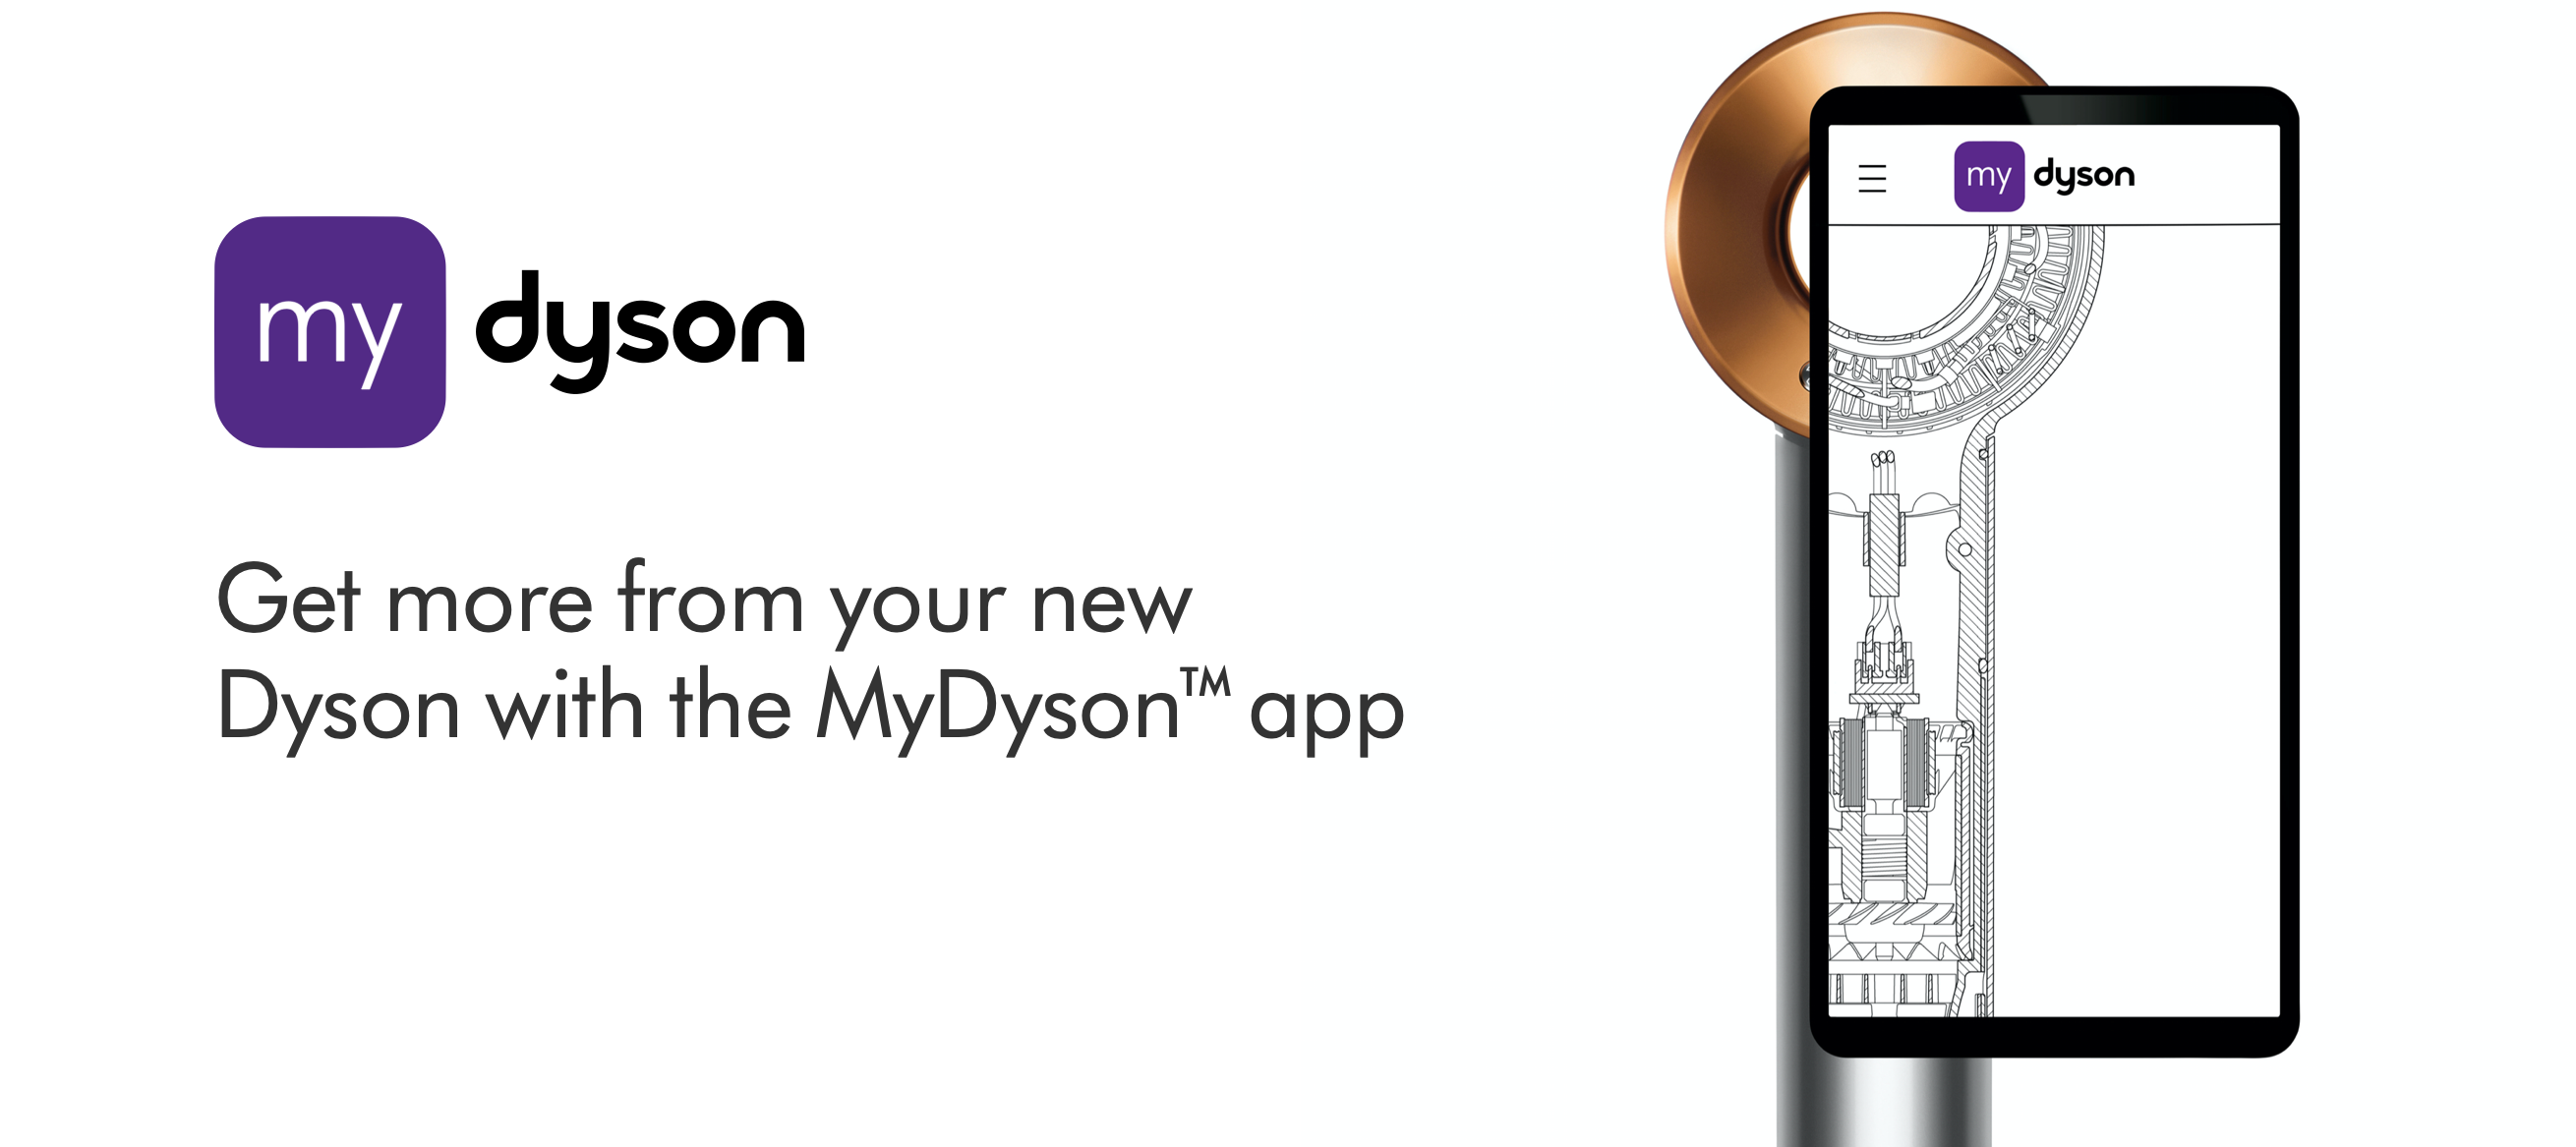 Joining MyDyson™ and registering your machines